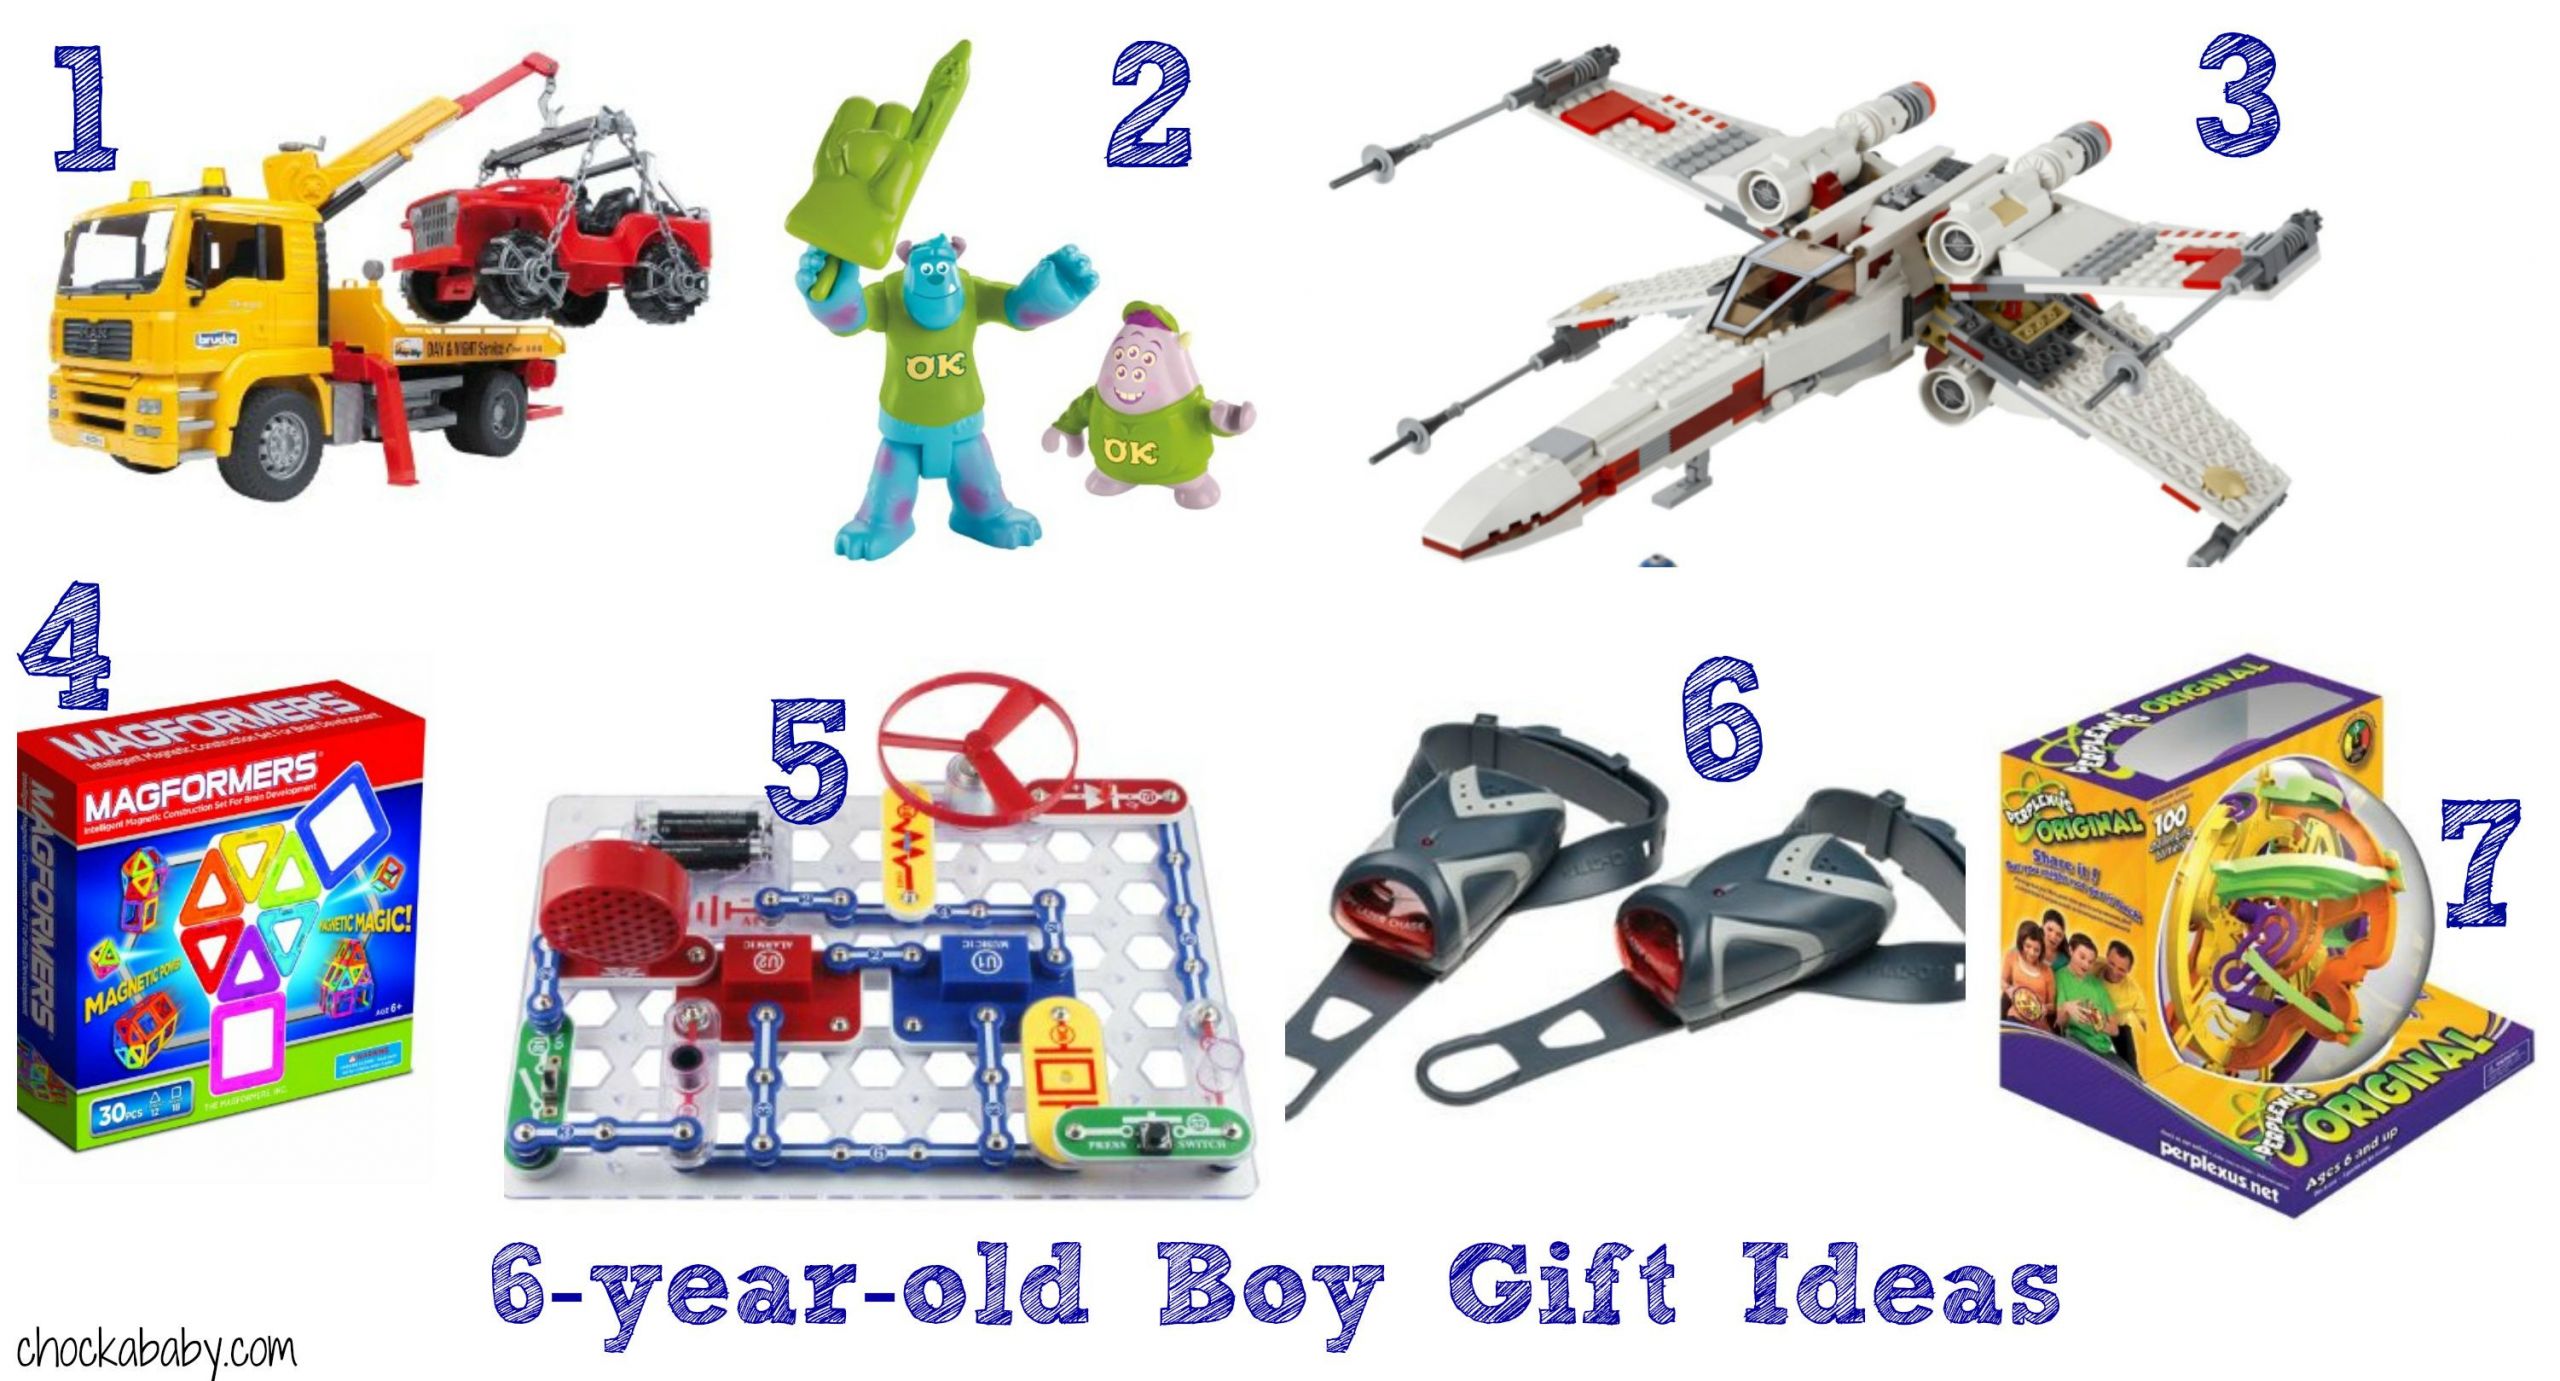 Christmas Gift Ideas 6 Year Old Boy
 t ideas for 6 year old boys